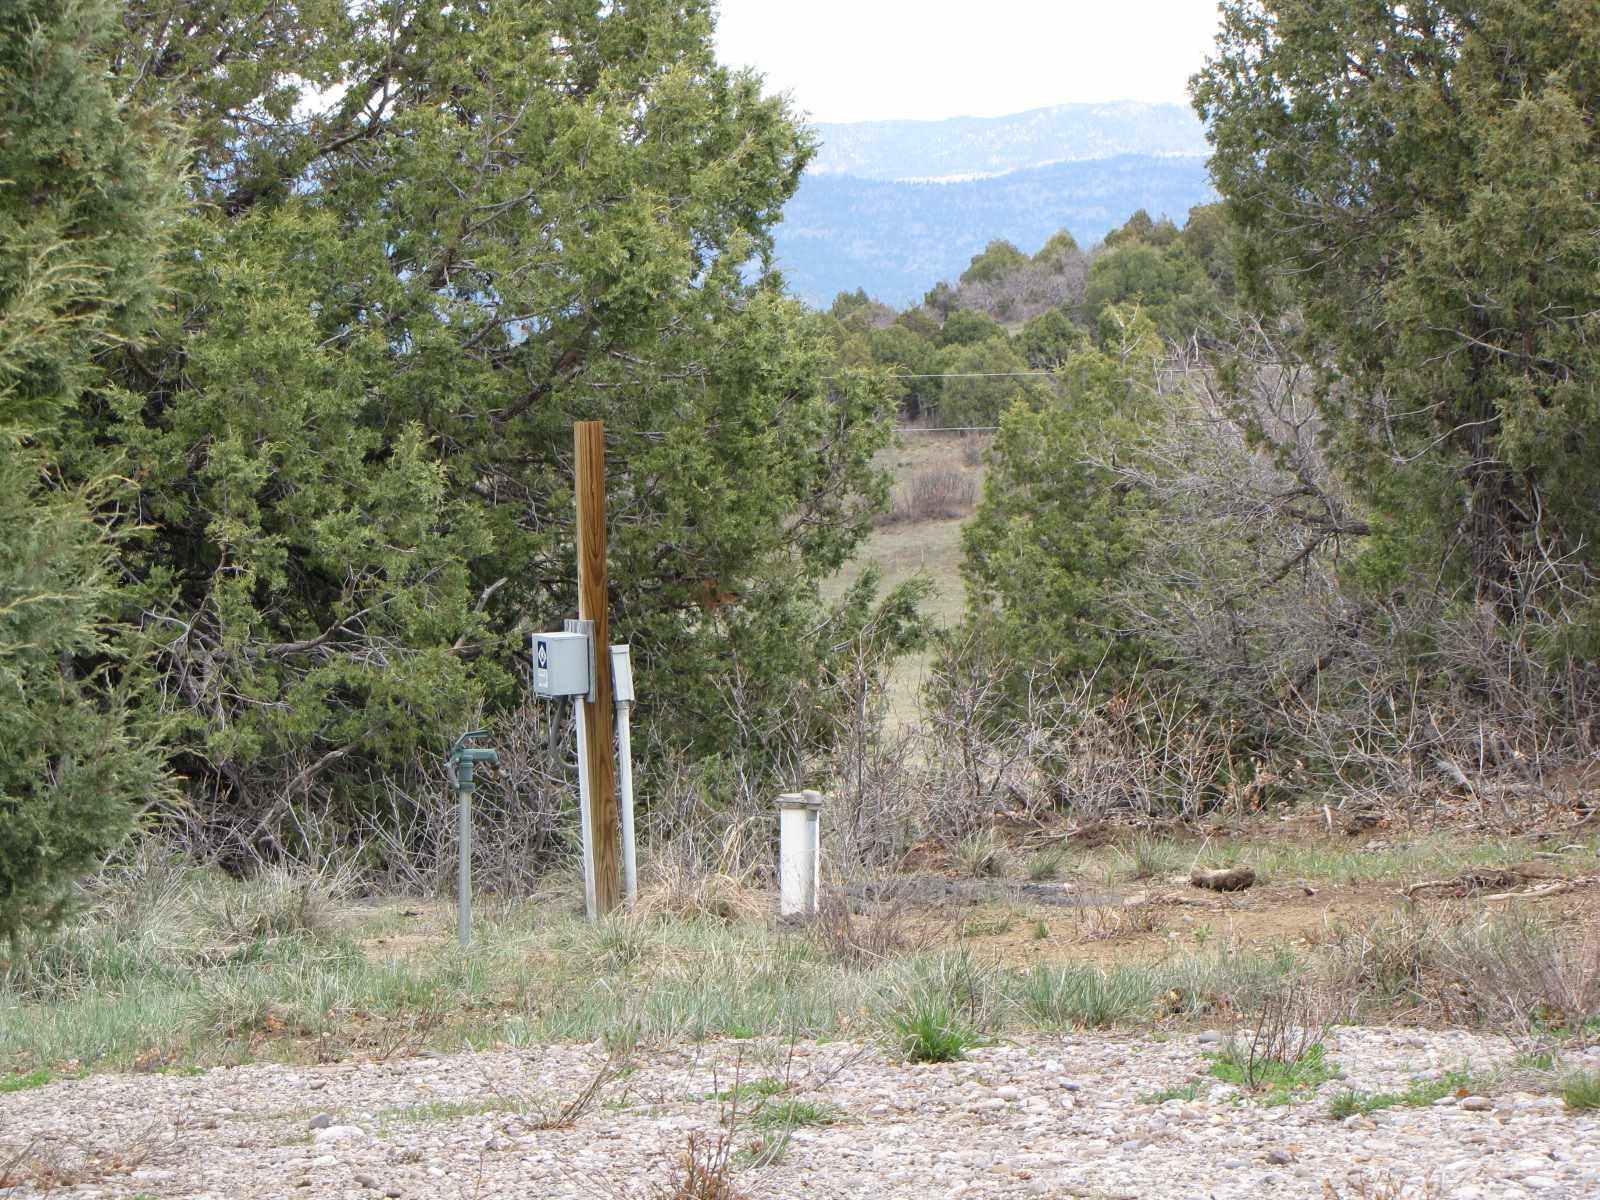 0 Tracts B & C Willow, Chama, New Mexico 87520, ,Land,For Sale,0 Tracts B & C Willow,201902099